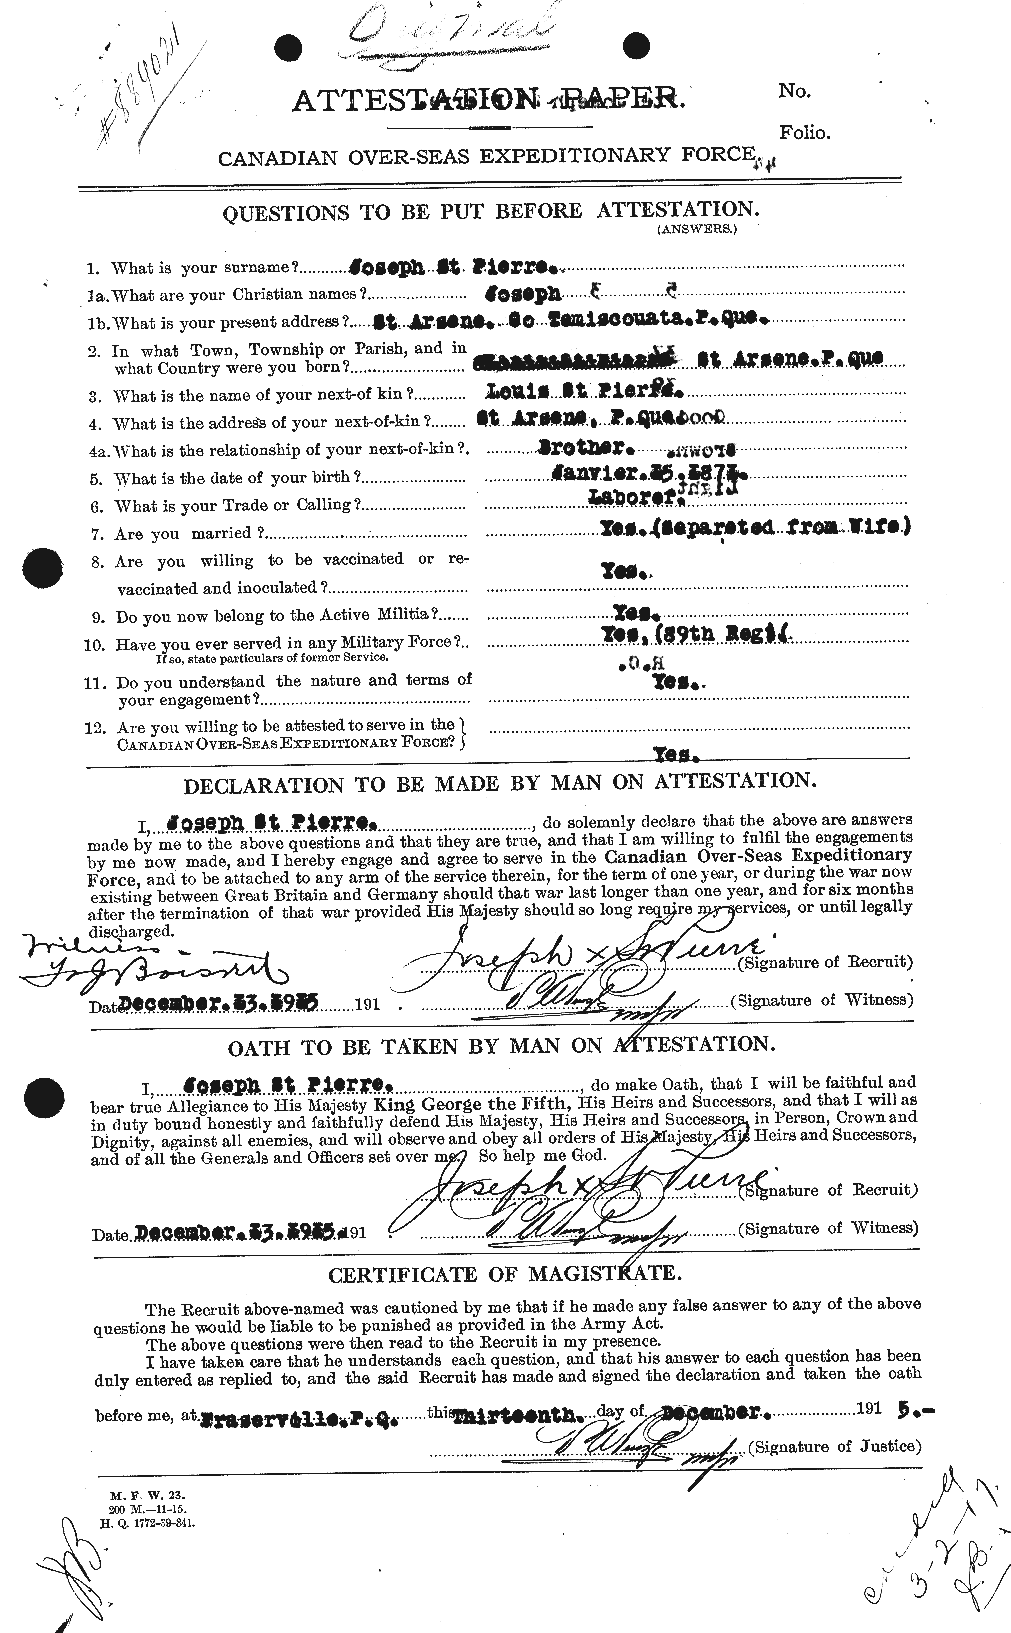 Personnel Records of the First World War - CEF 077673a